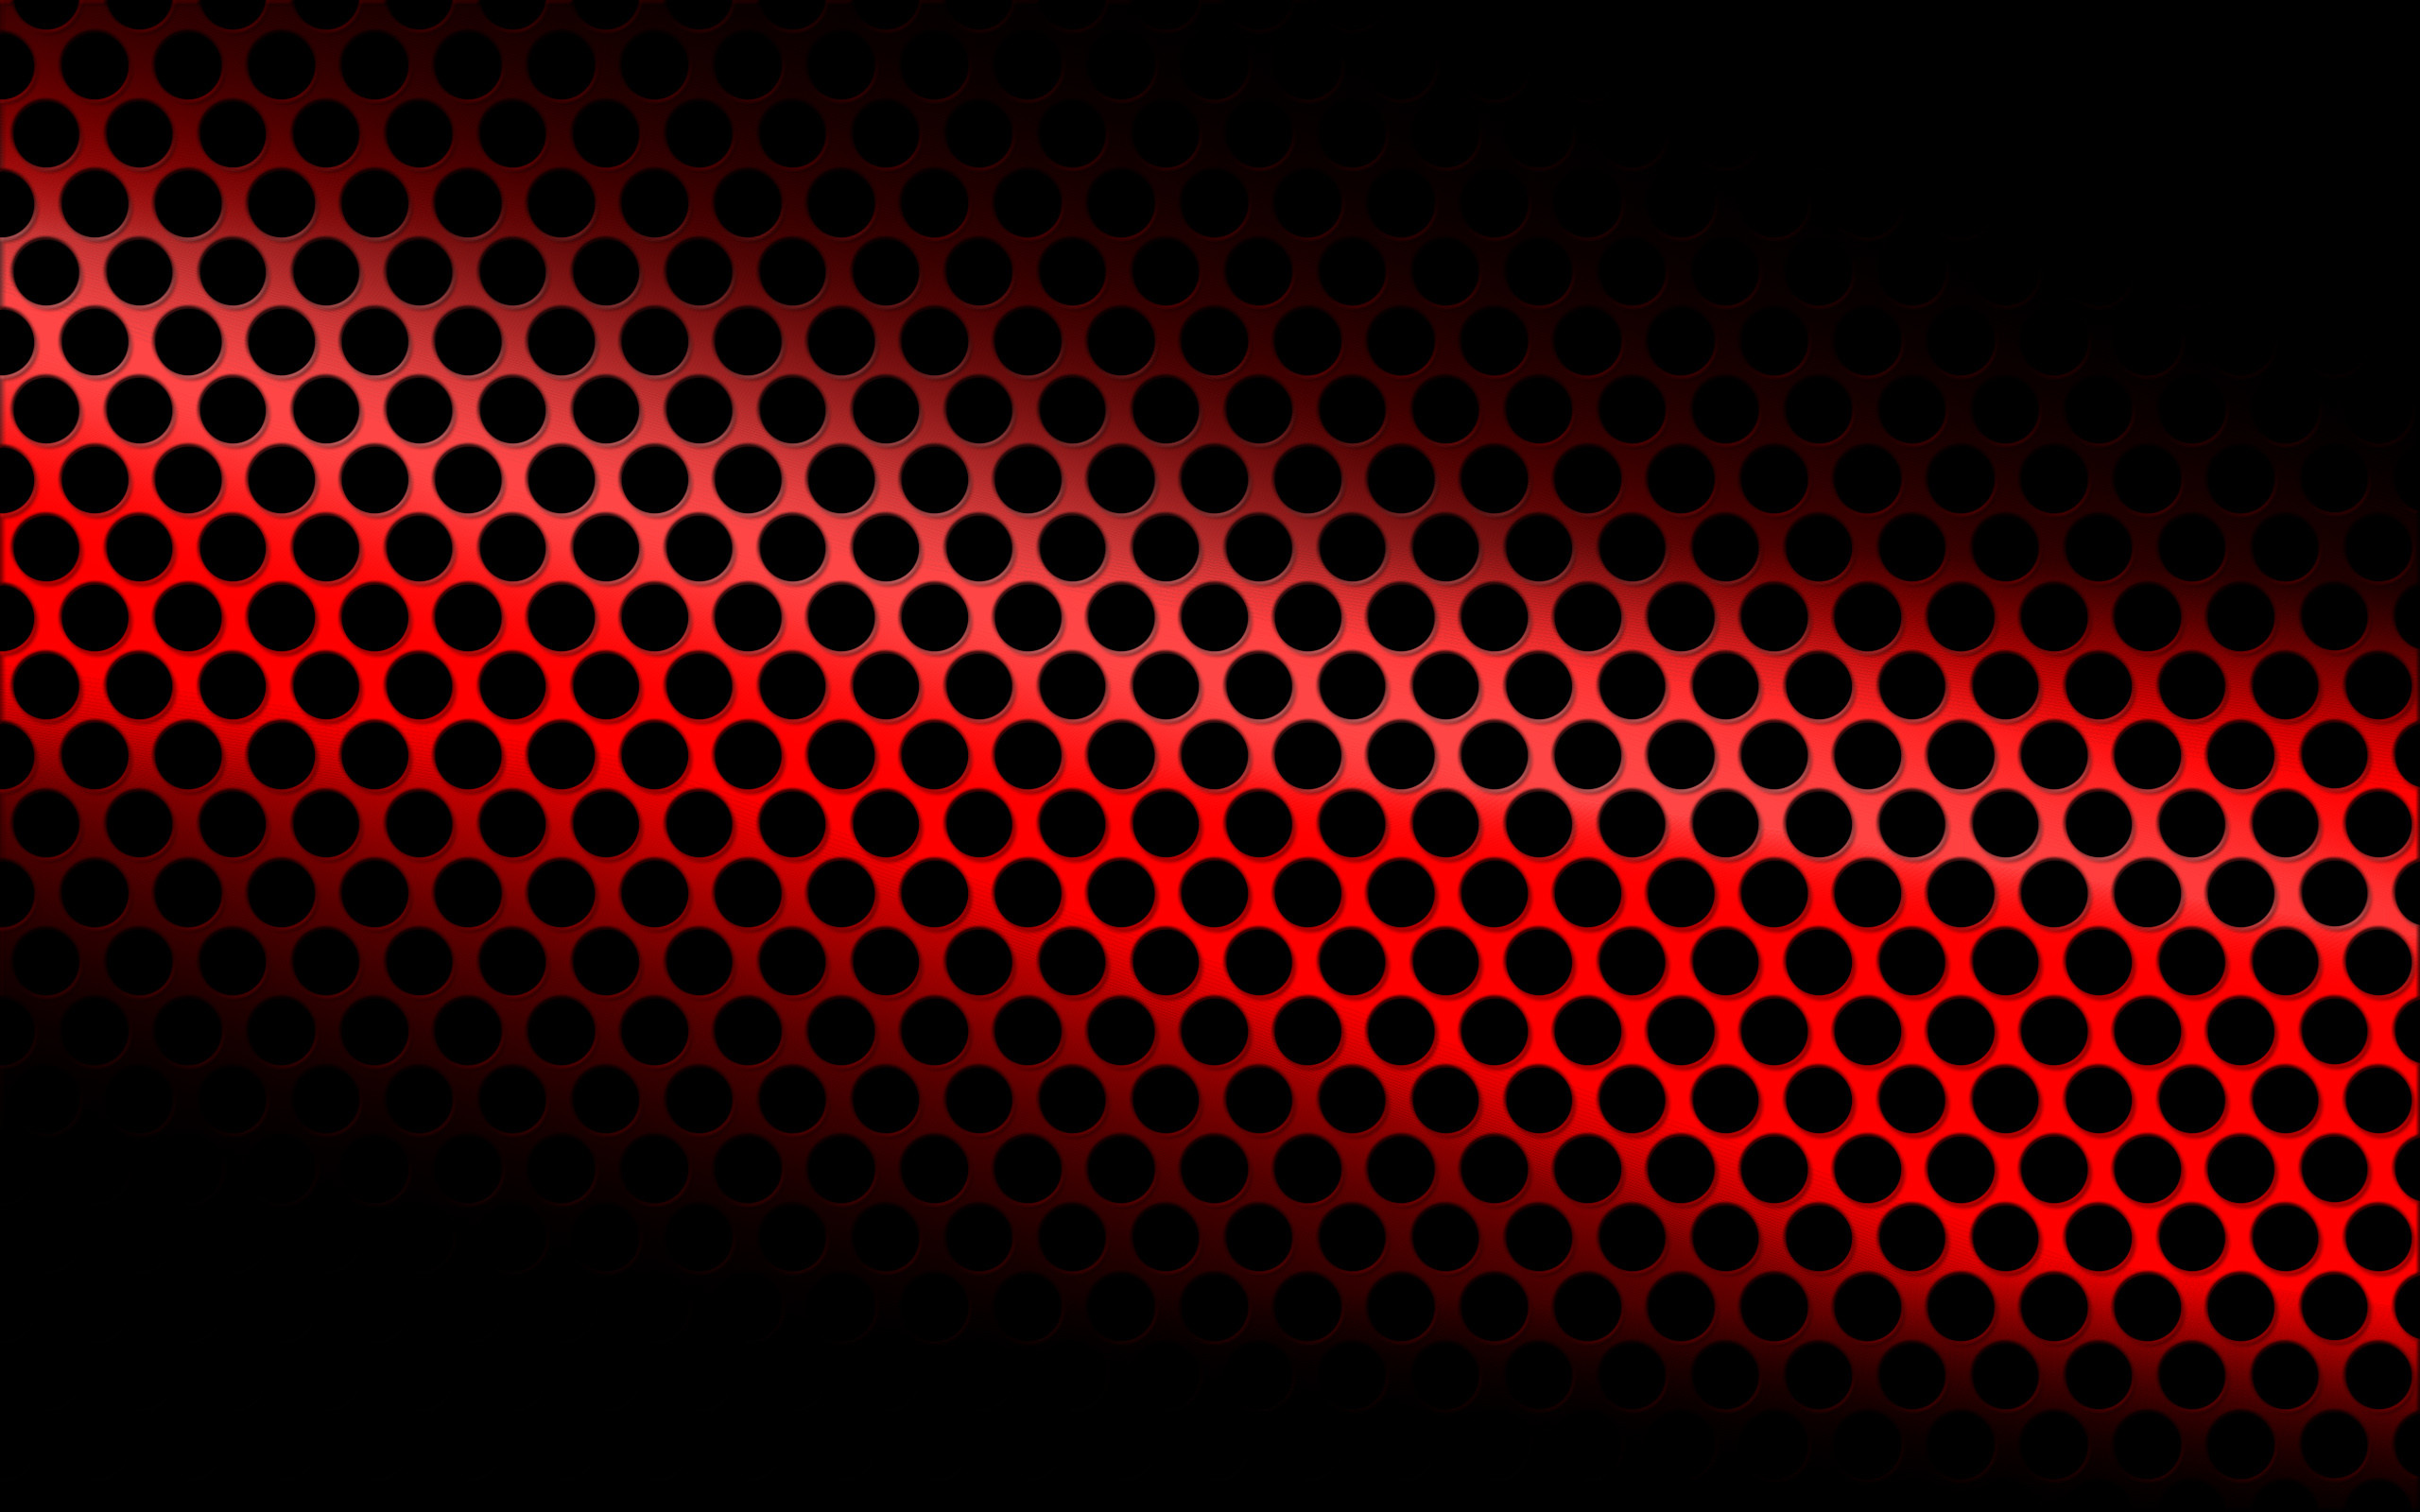 2560x1600 Iphone Wallpaper Black And Red 8 Widescreen Wallpaper